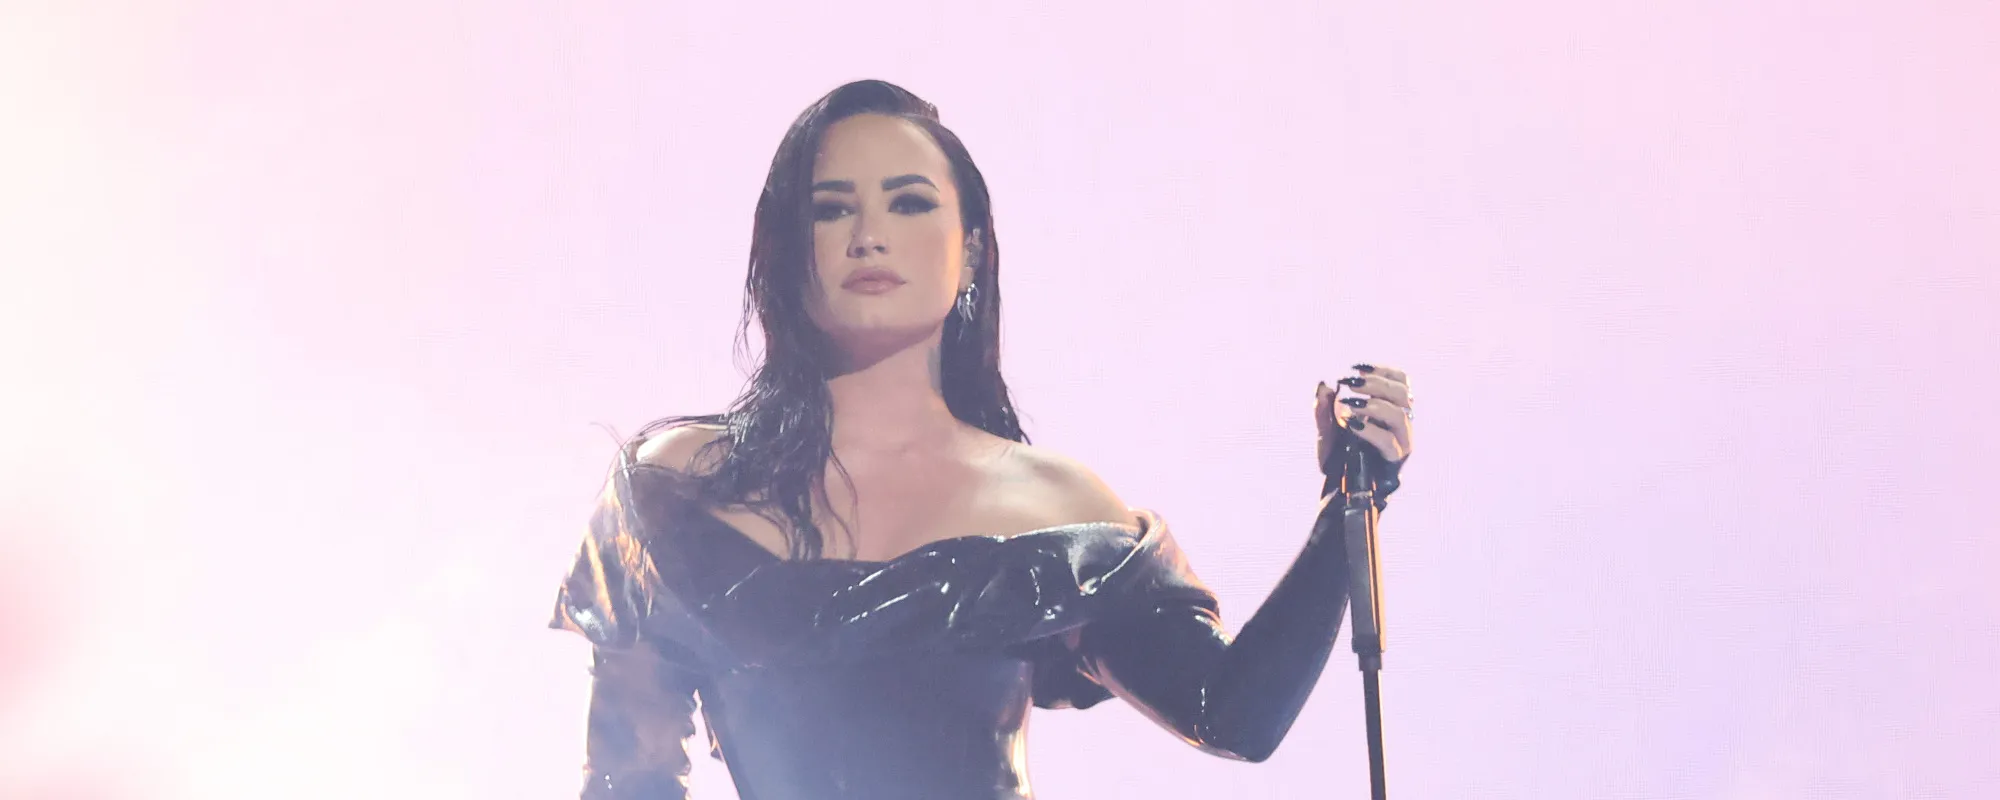 Review: Demi Lovato Updates Her Hits on ‘REVAMPED’ to Mixed Results